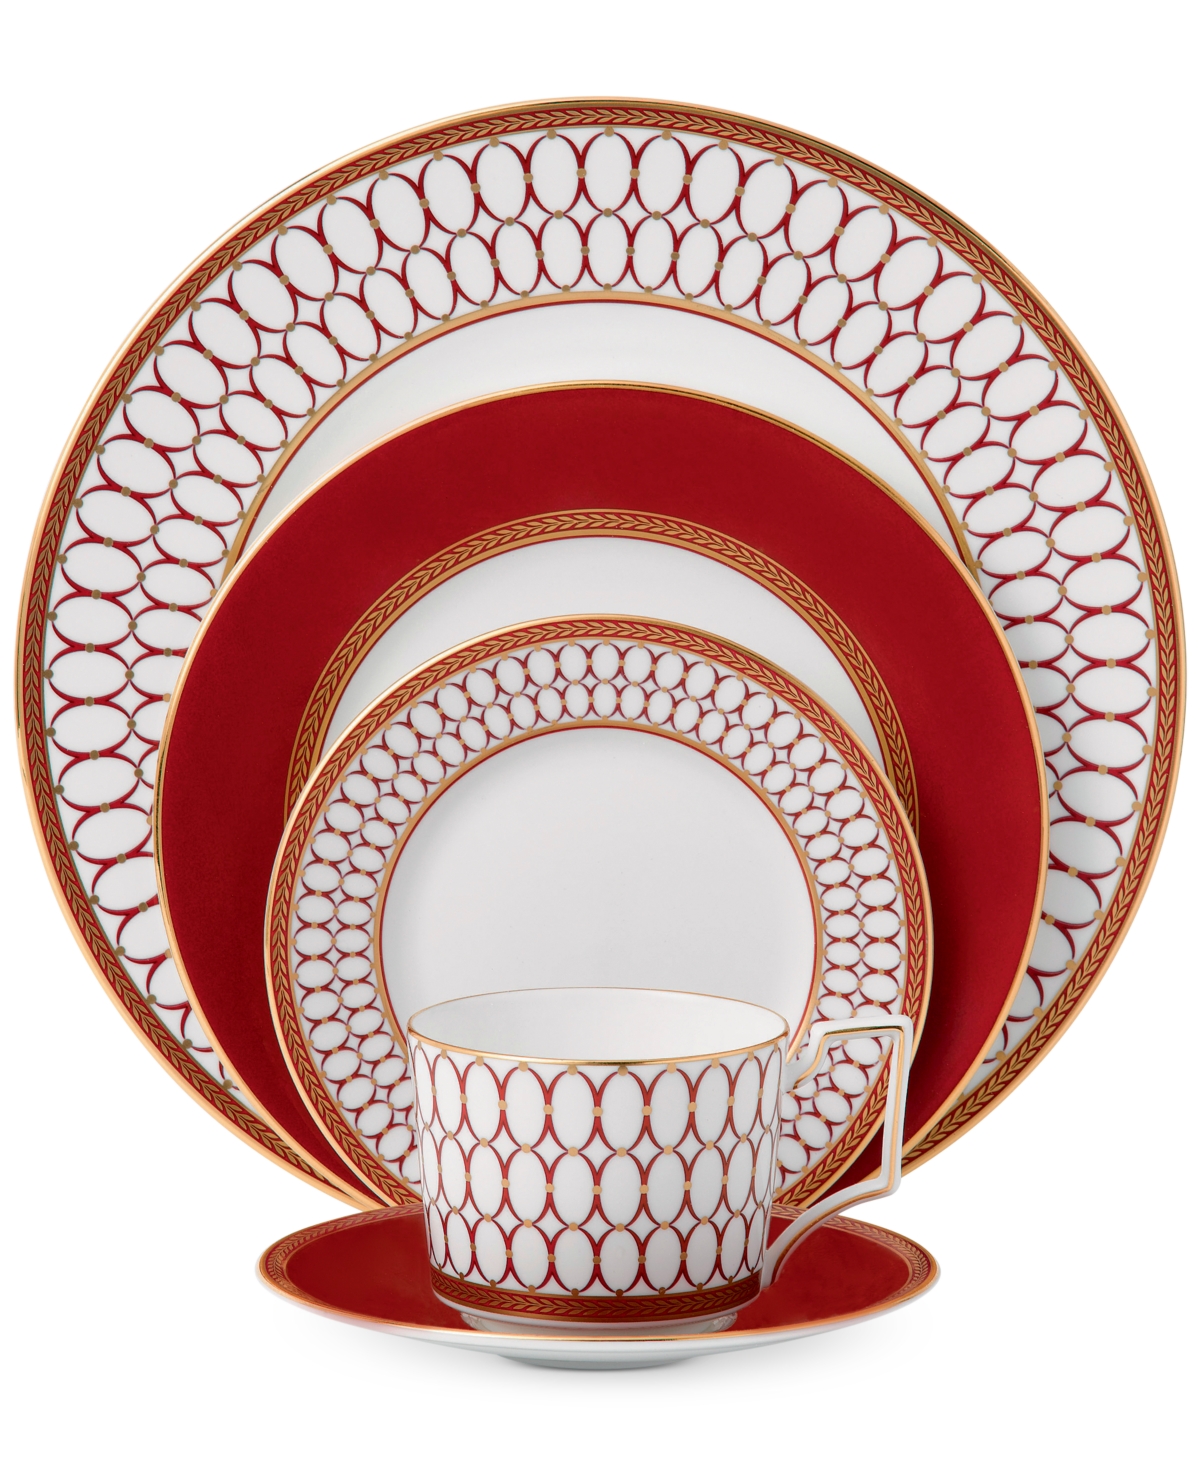 Wedgwood Renaissance Red 5-pc. Place Setting In No Color